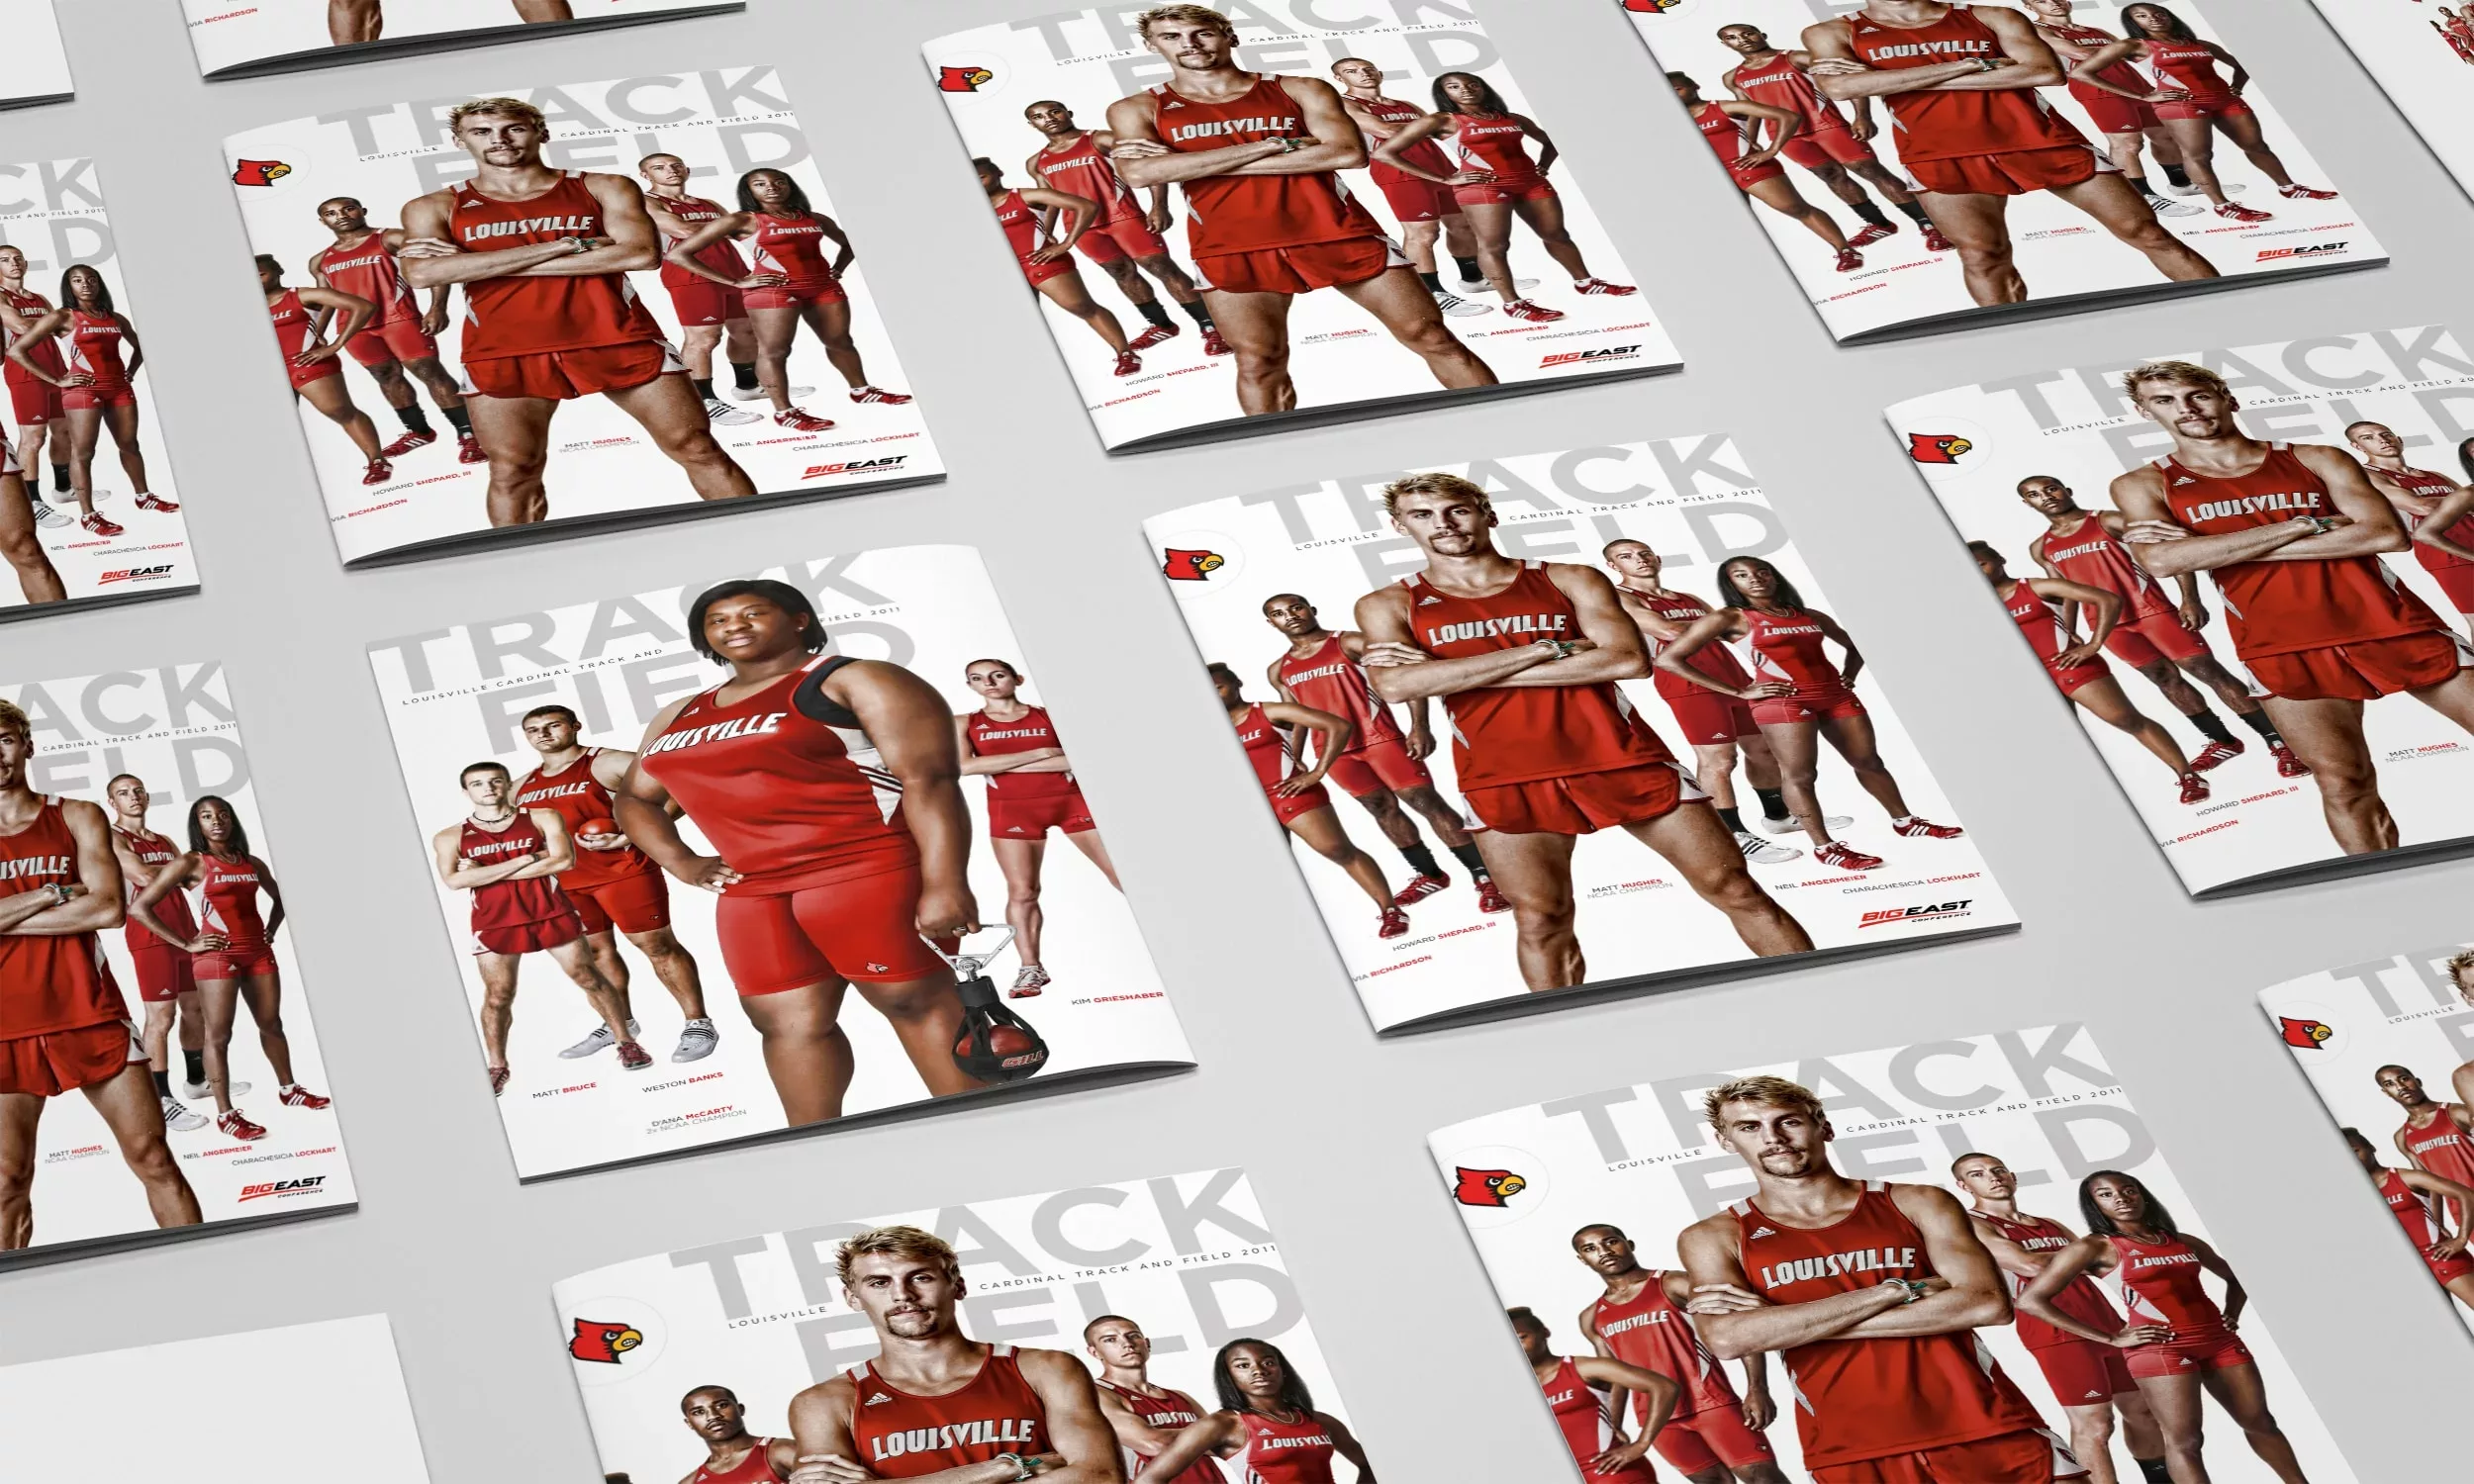 Louisville track and field media guide